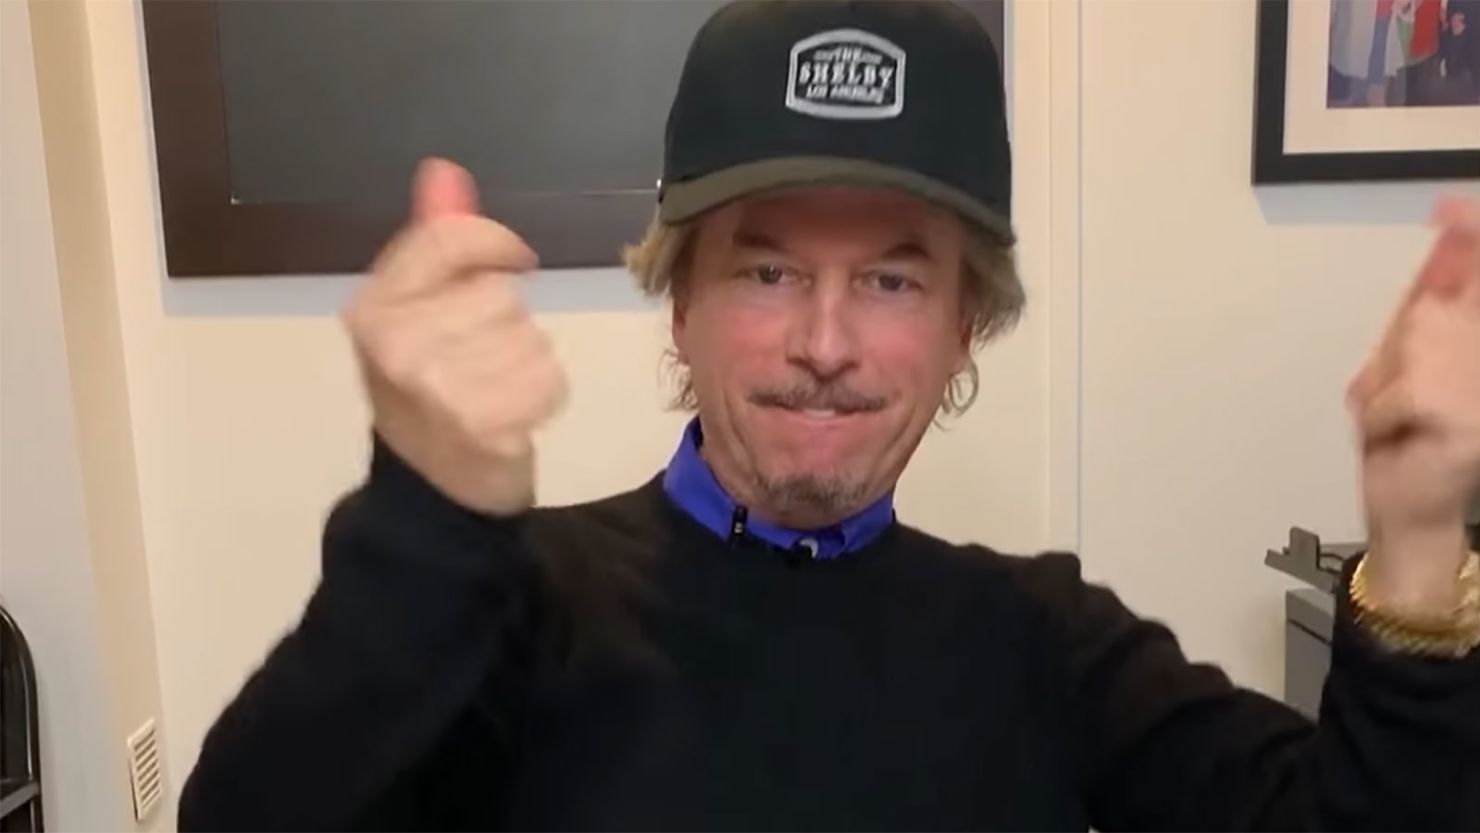 David Spade is doing his late-night show from his home office.